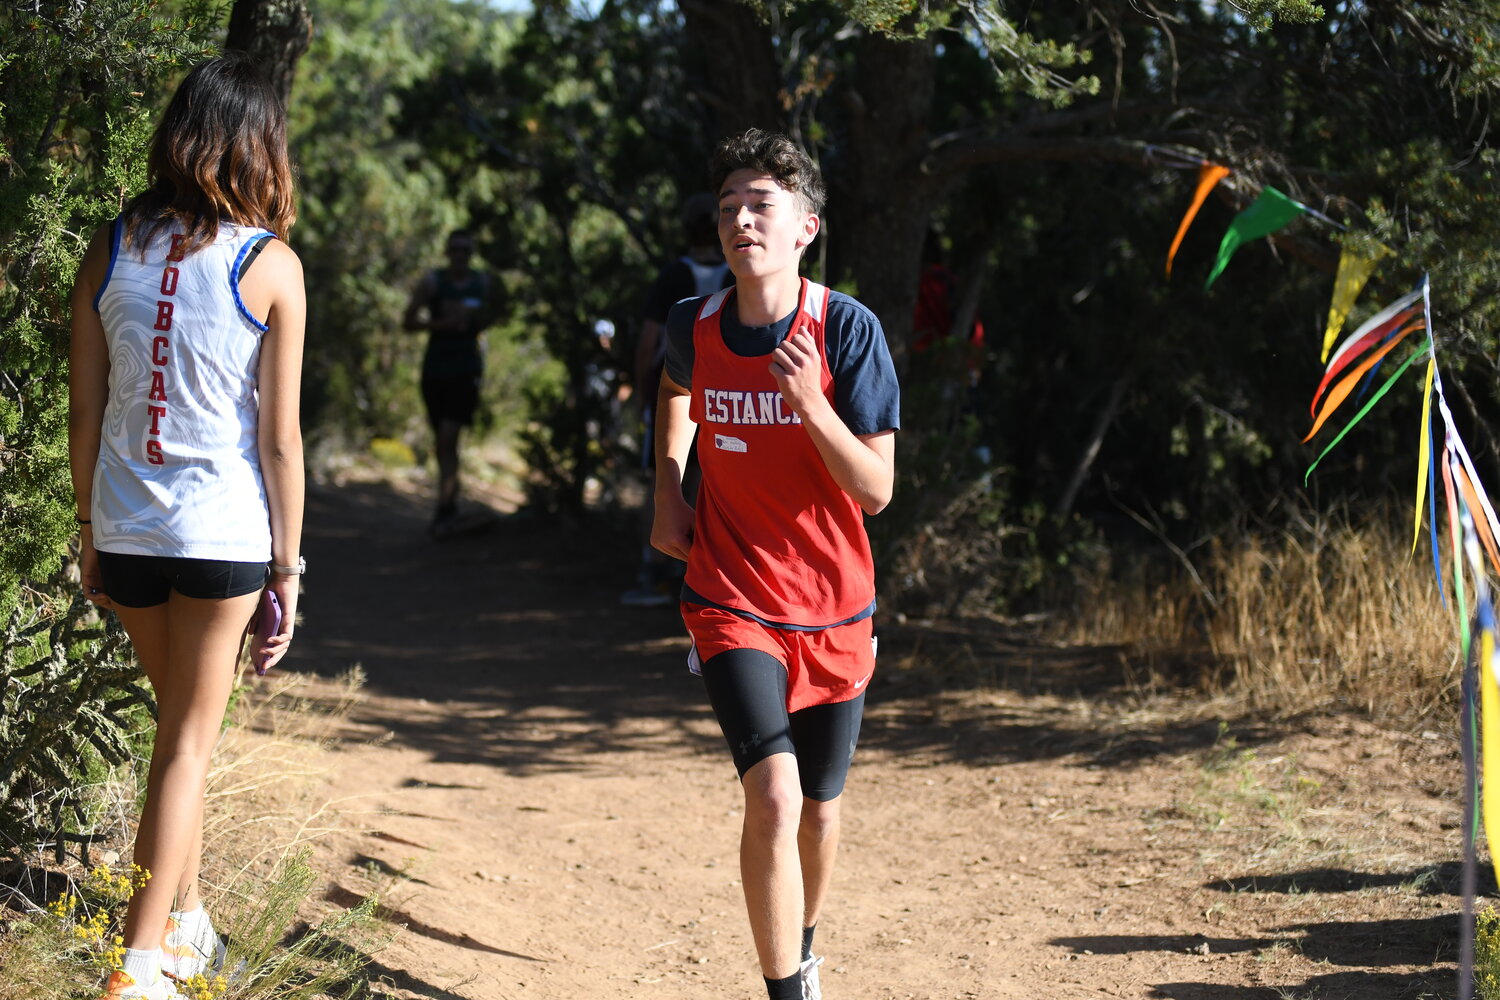 Estancia's Stephen Barela emerges from the woods during the boys varsity race at last week's Nick Martin Memorial Invite.